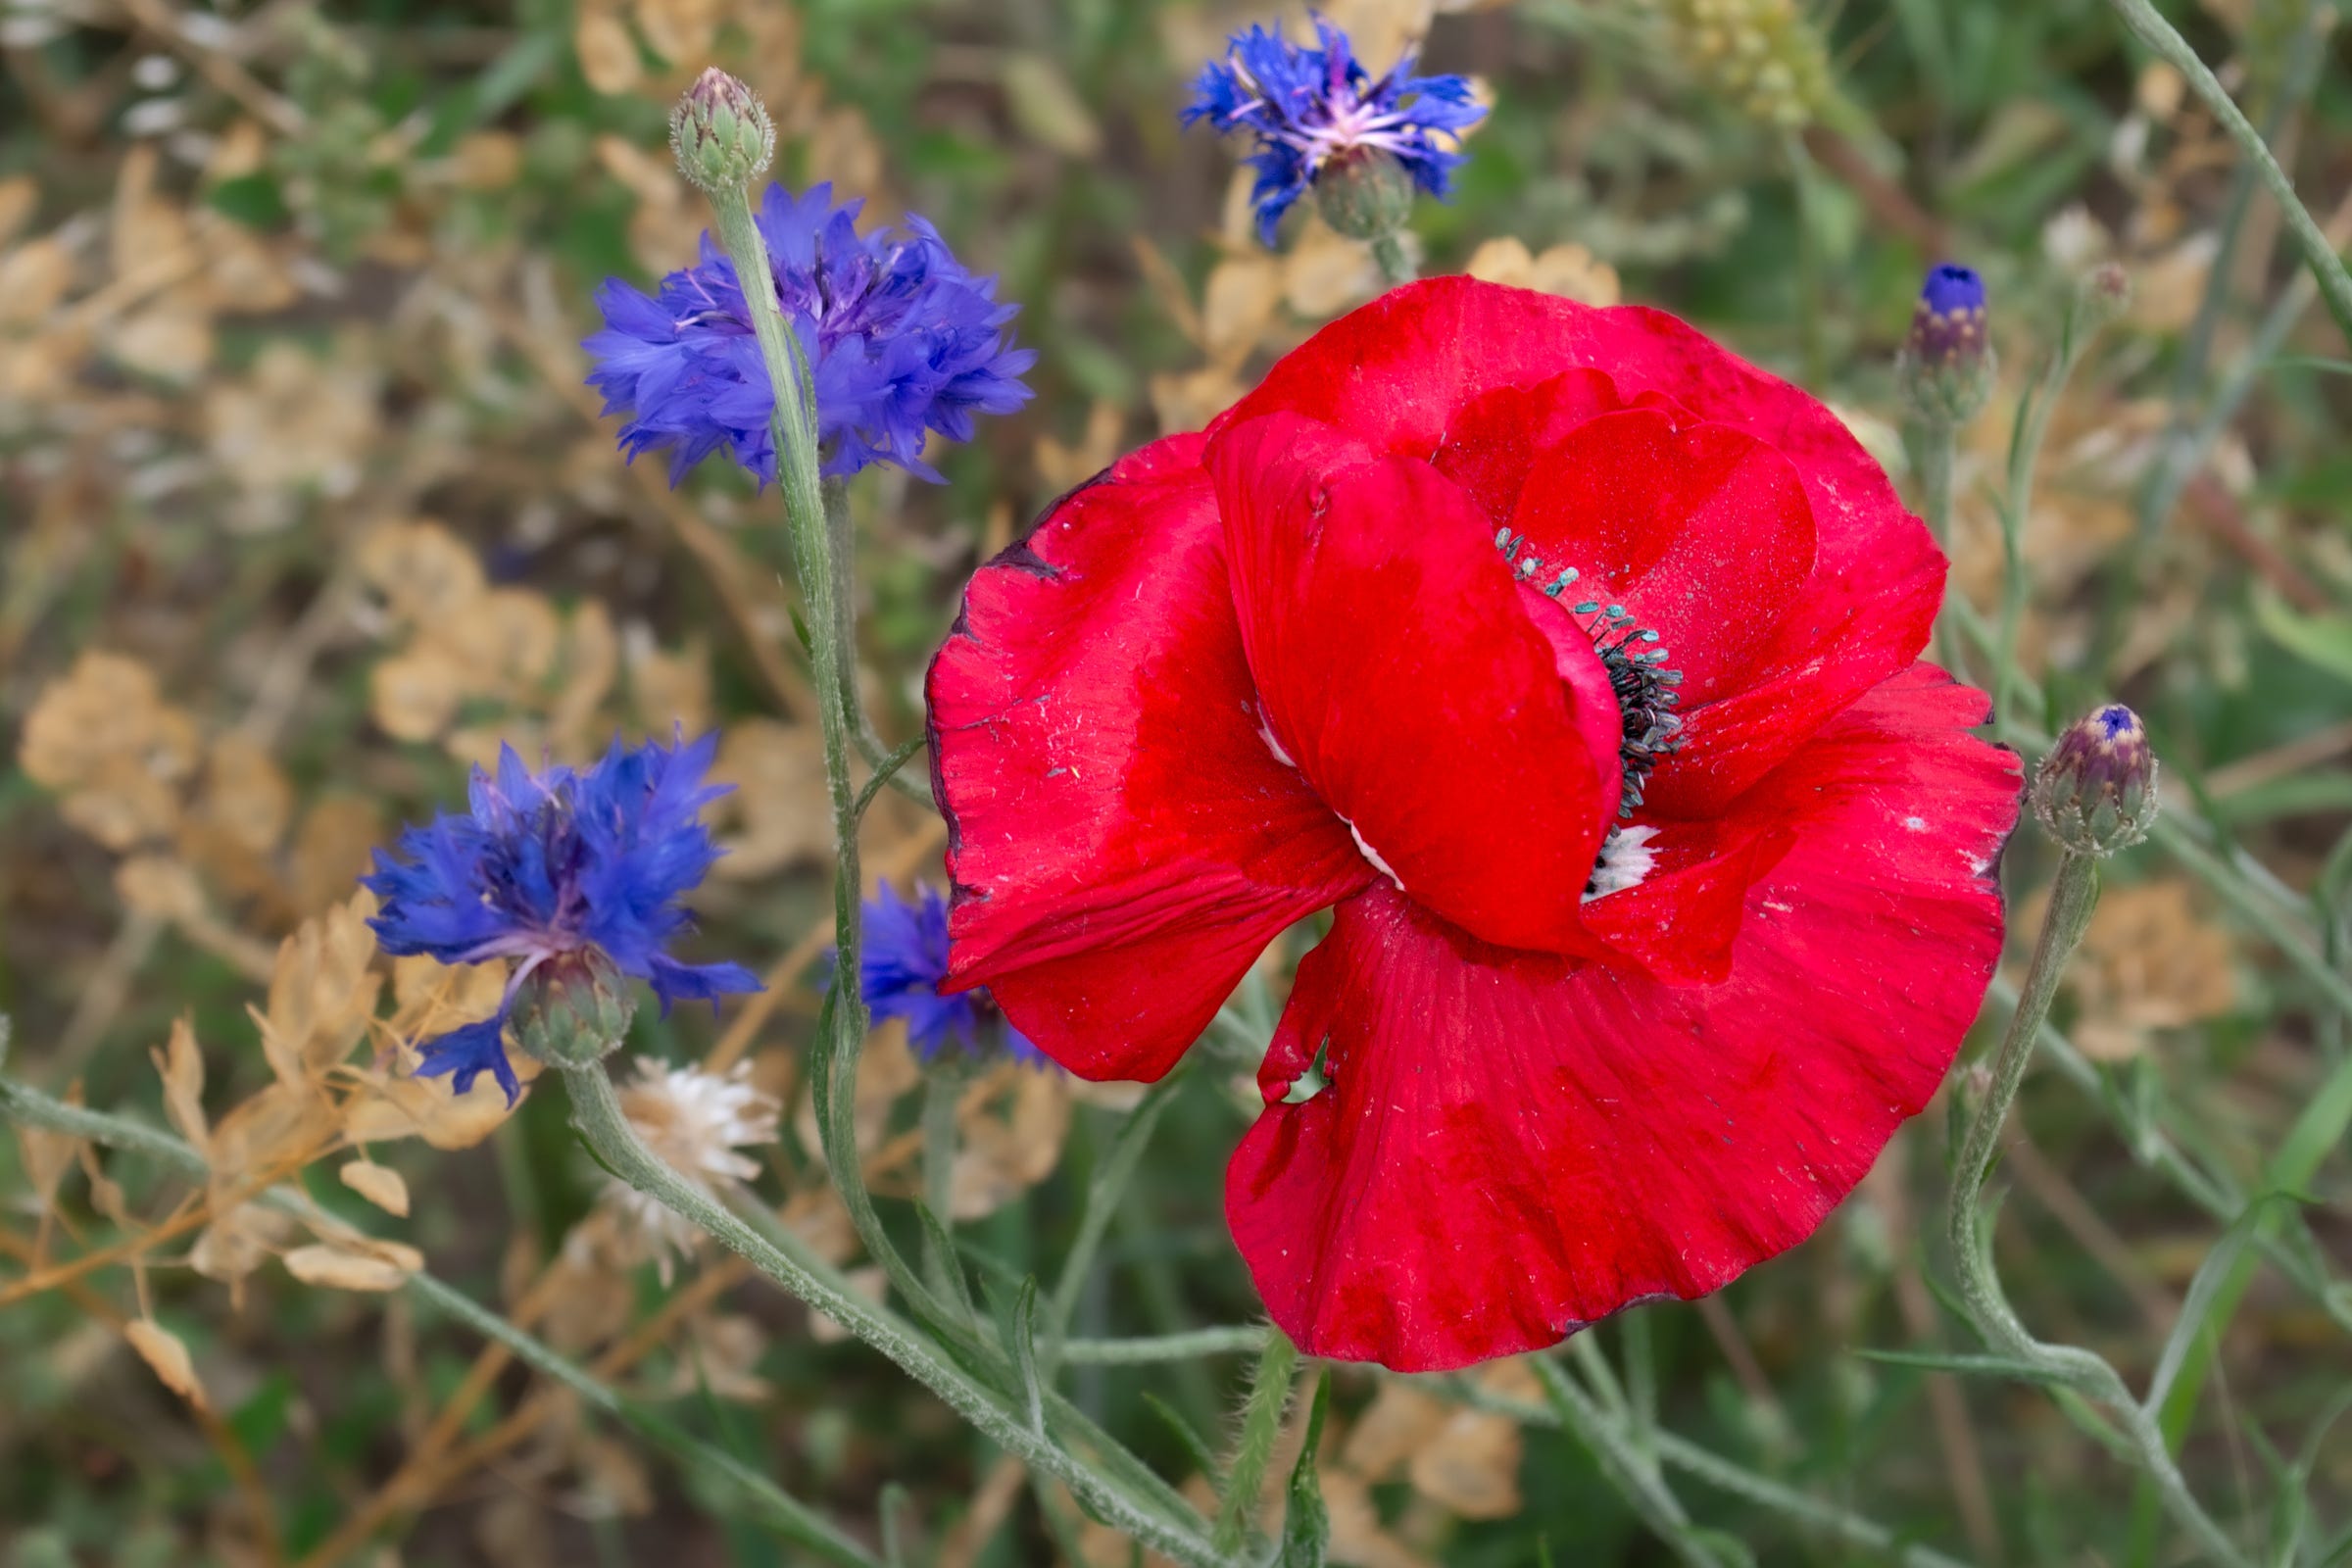 Red poppy in a field with small dark blue flowers behind it